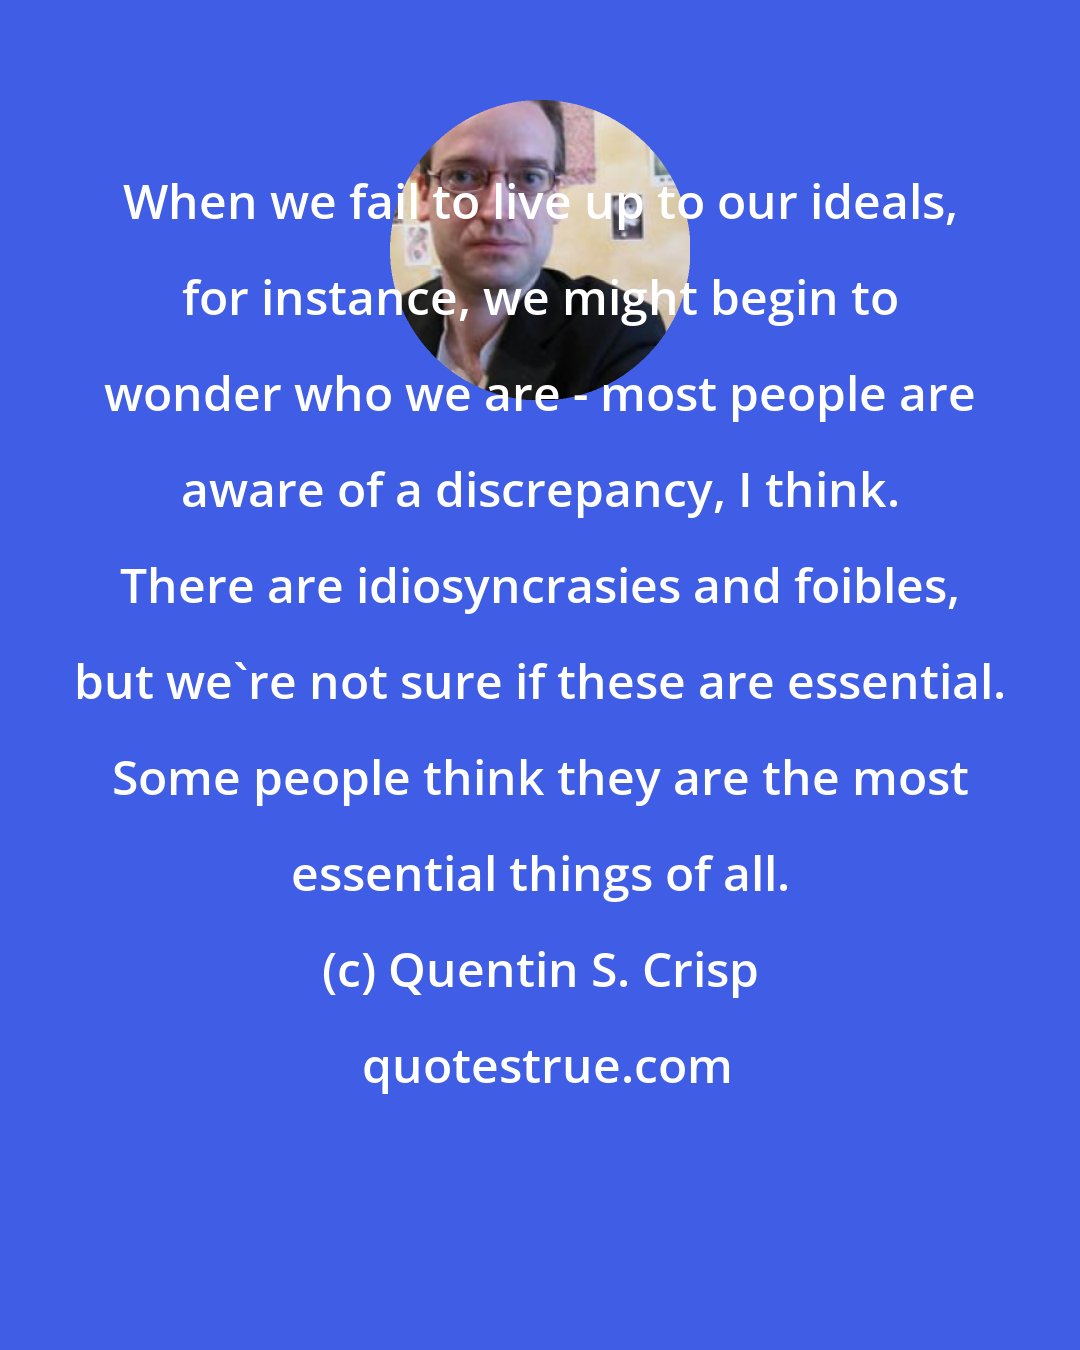 Quentin S. Crisp: When we fail to live up to our ideals, for instance, we might begin to wonder who we are - most people are aware of a discrepancy, I think. There are idiosyncrasies and foibles, but we're not sure if these are essential. Some people think they are the most essential things of all.